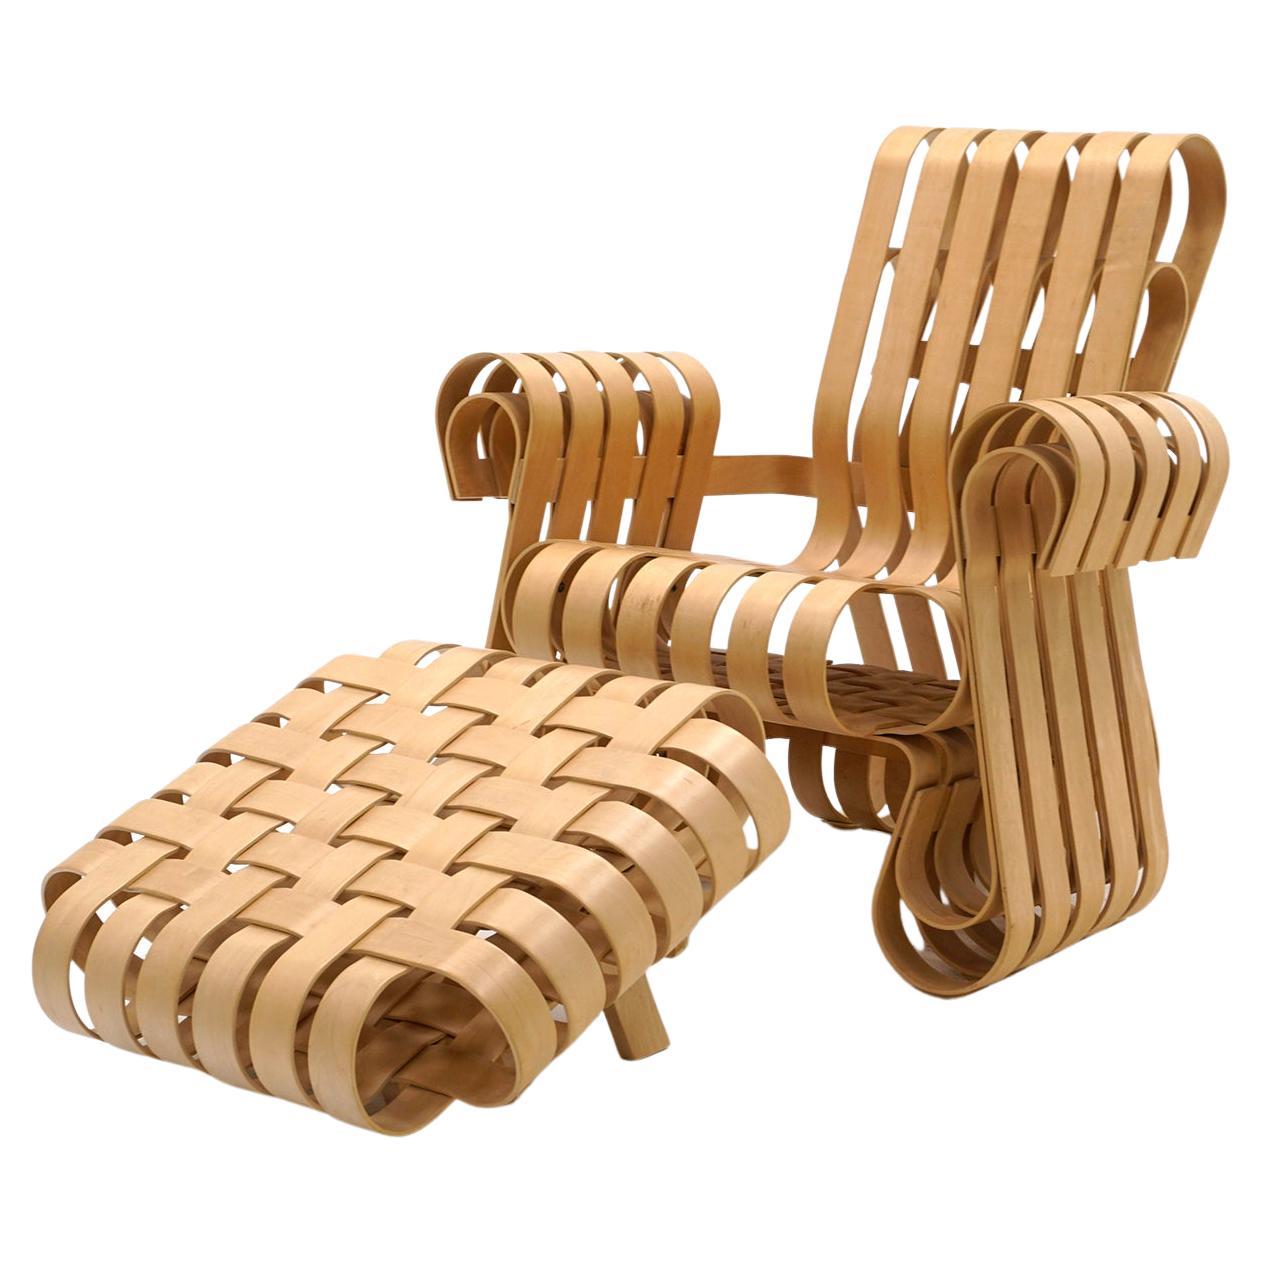 What is the name of Frank Gehry's chair?